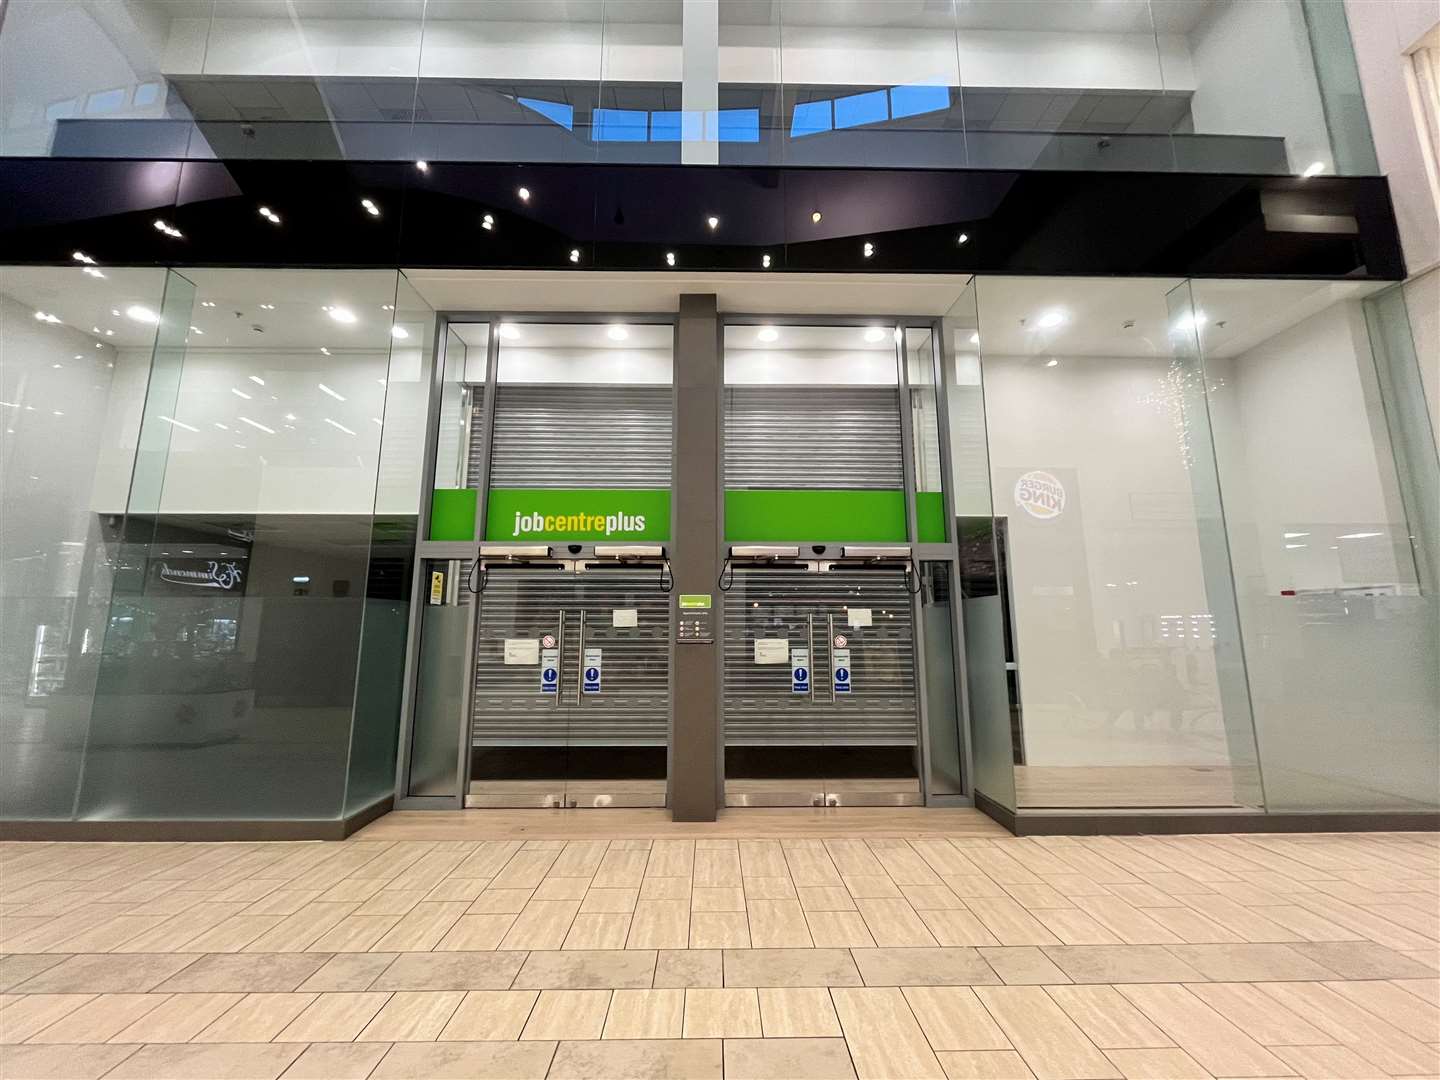 Job Centre Plus was the last to close at the shopping centre